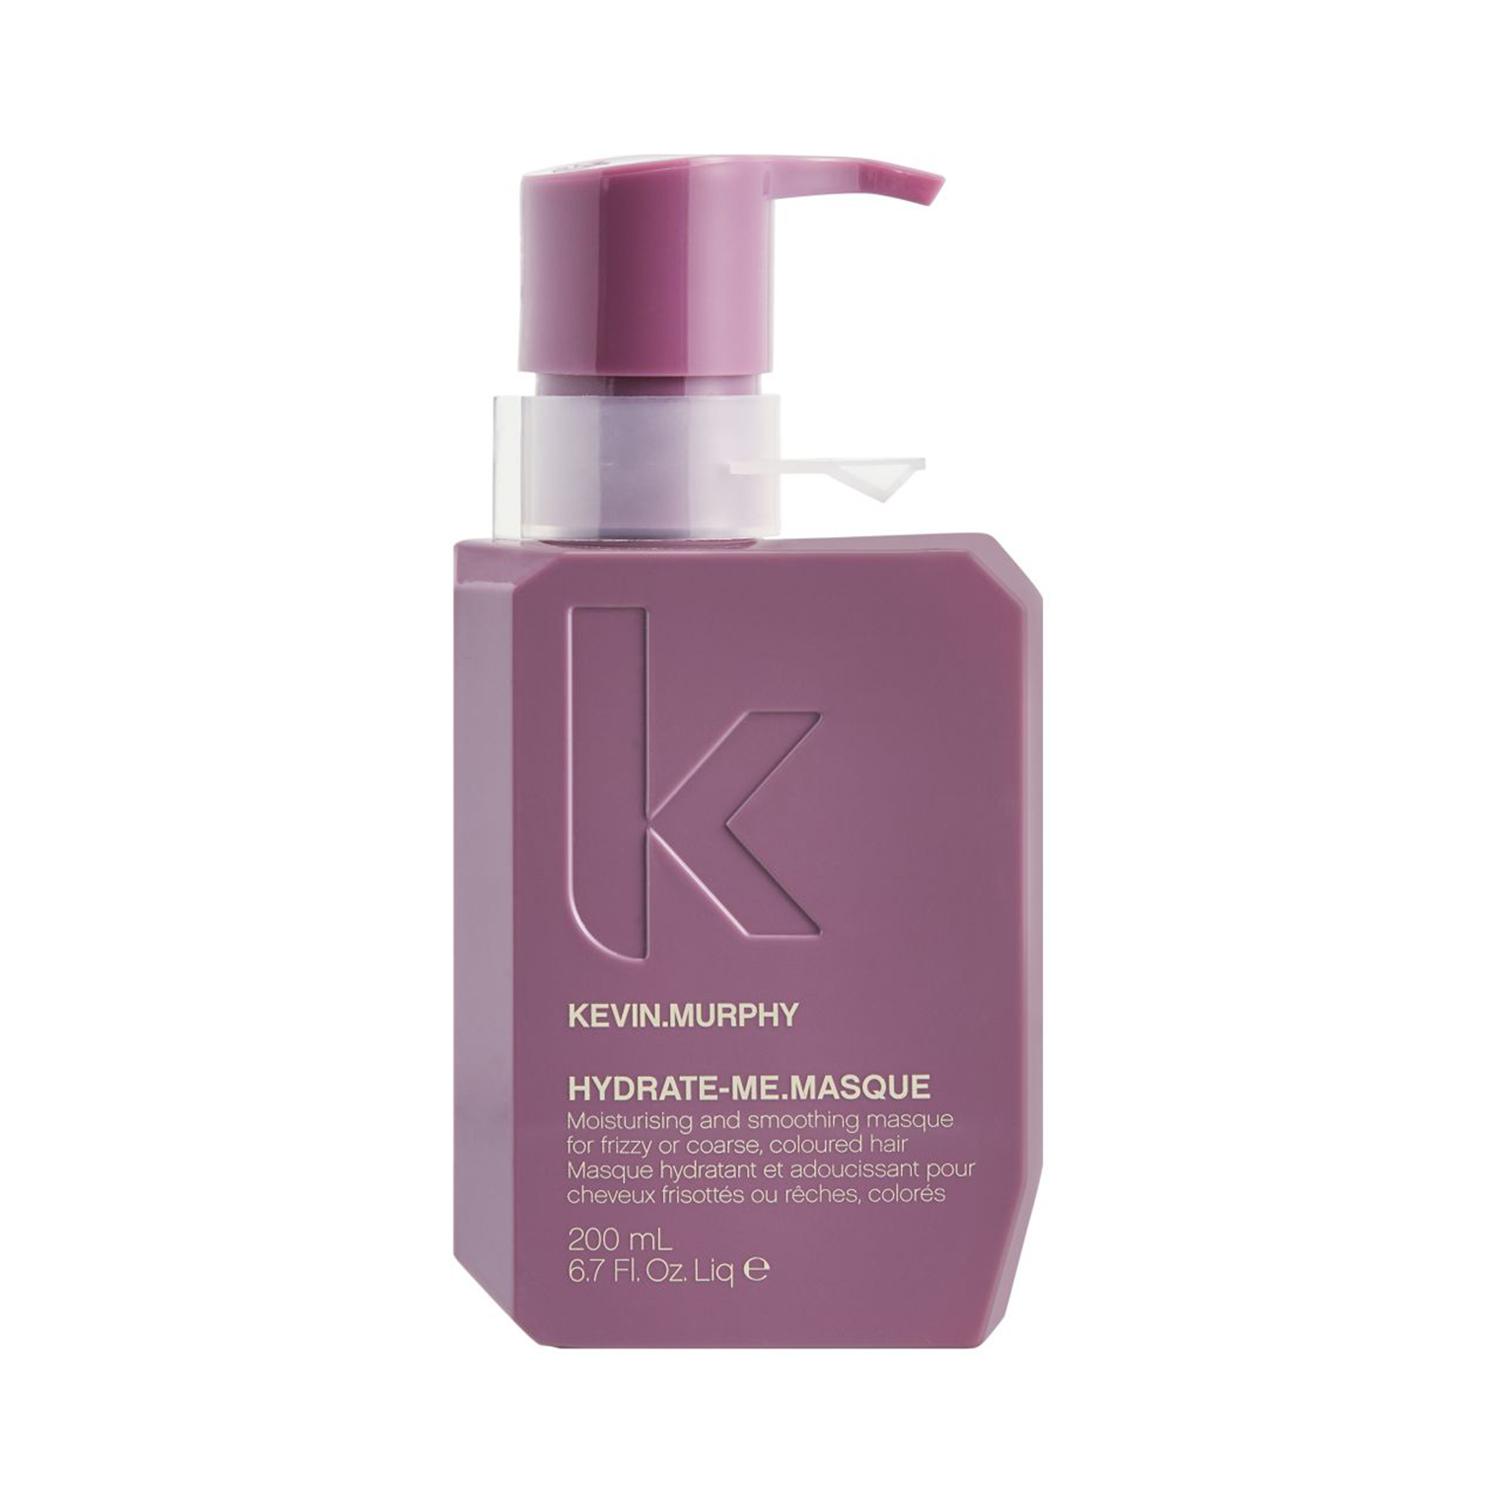 Kevin Murphy | Kevin Murphy Hydrate-Me Masque Moisturizing And Smoothing Masque (200ml)